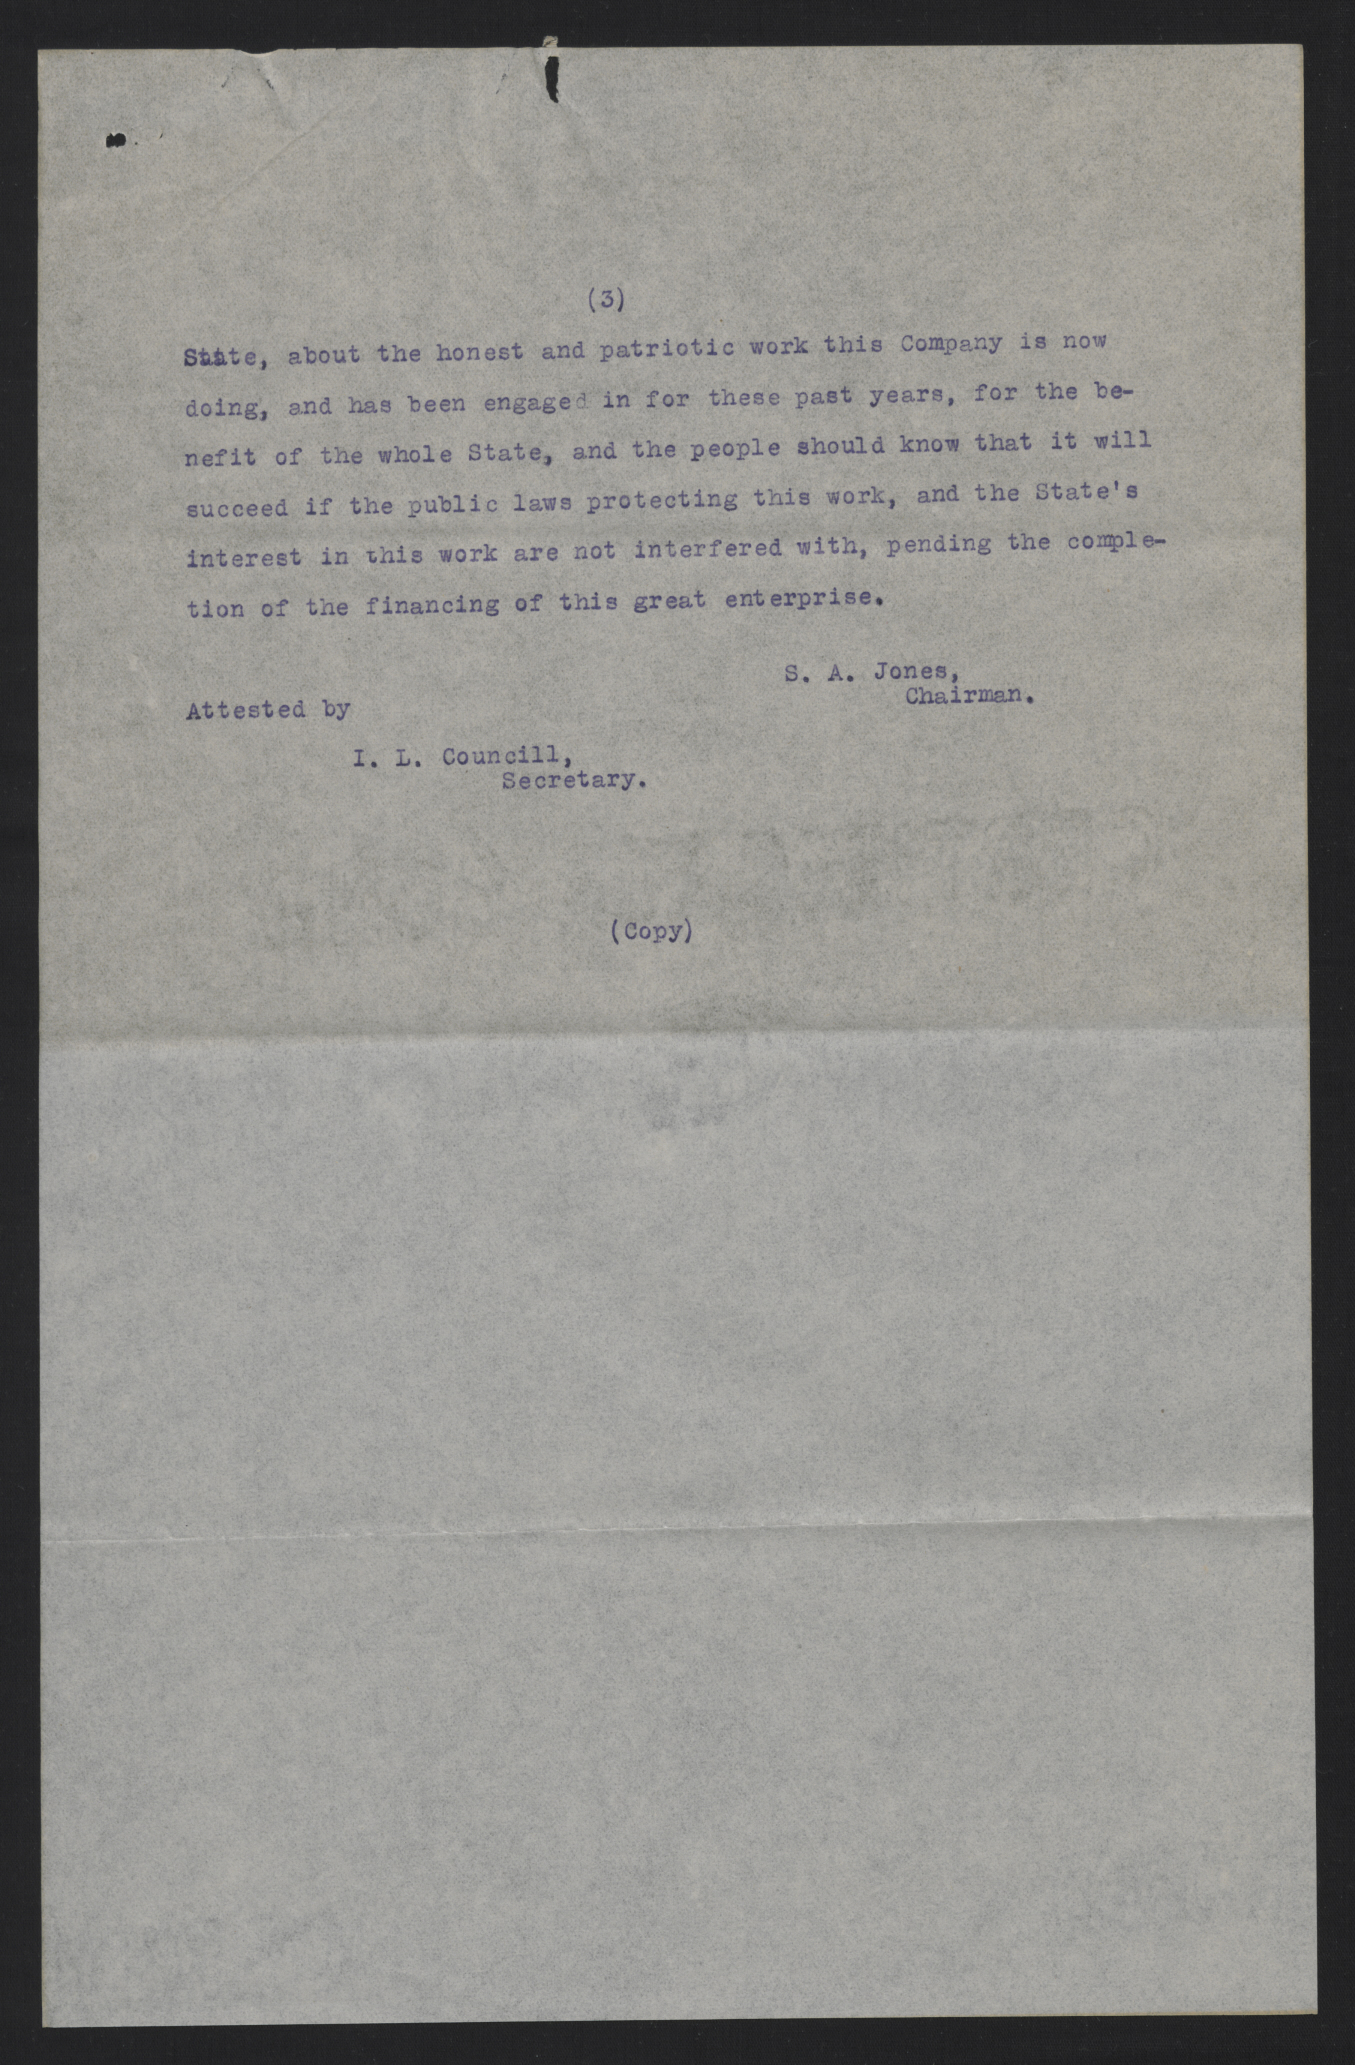 Resolution of the South Atlantic and Western Railway Company, August 2, 1913, page 3